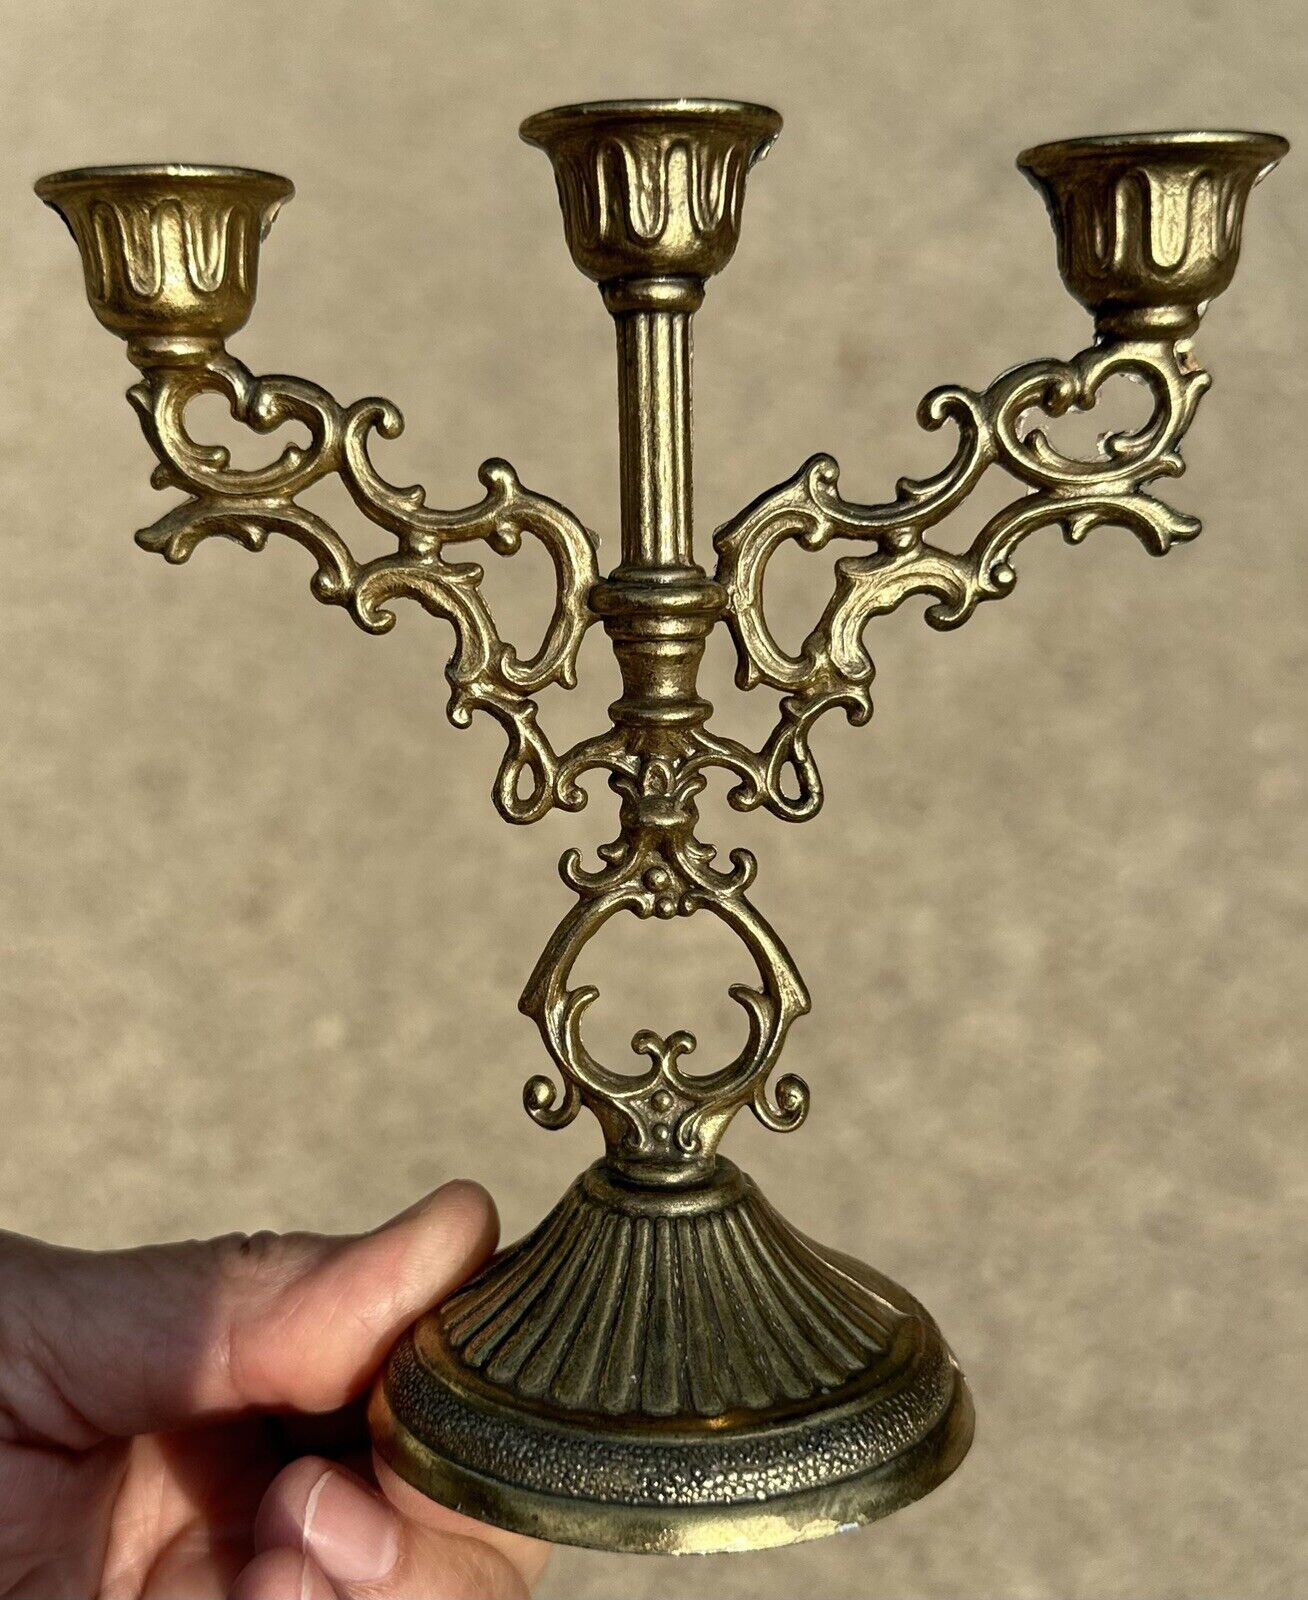 Mini Brass Candle Candelabra Interpur Italy Vintage Approximately 5” X 5”